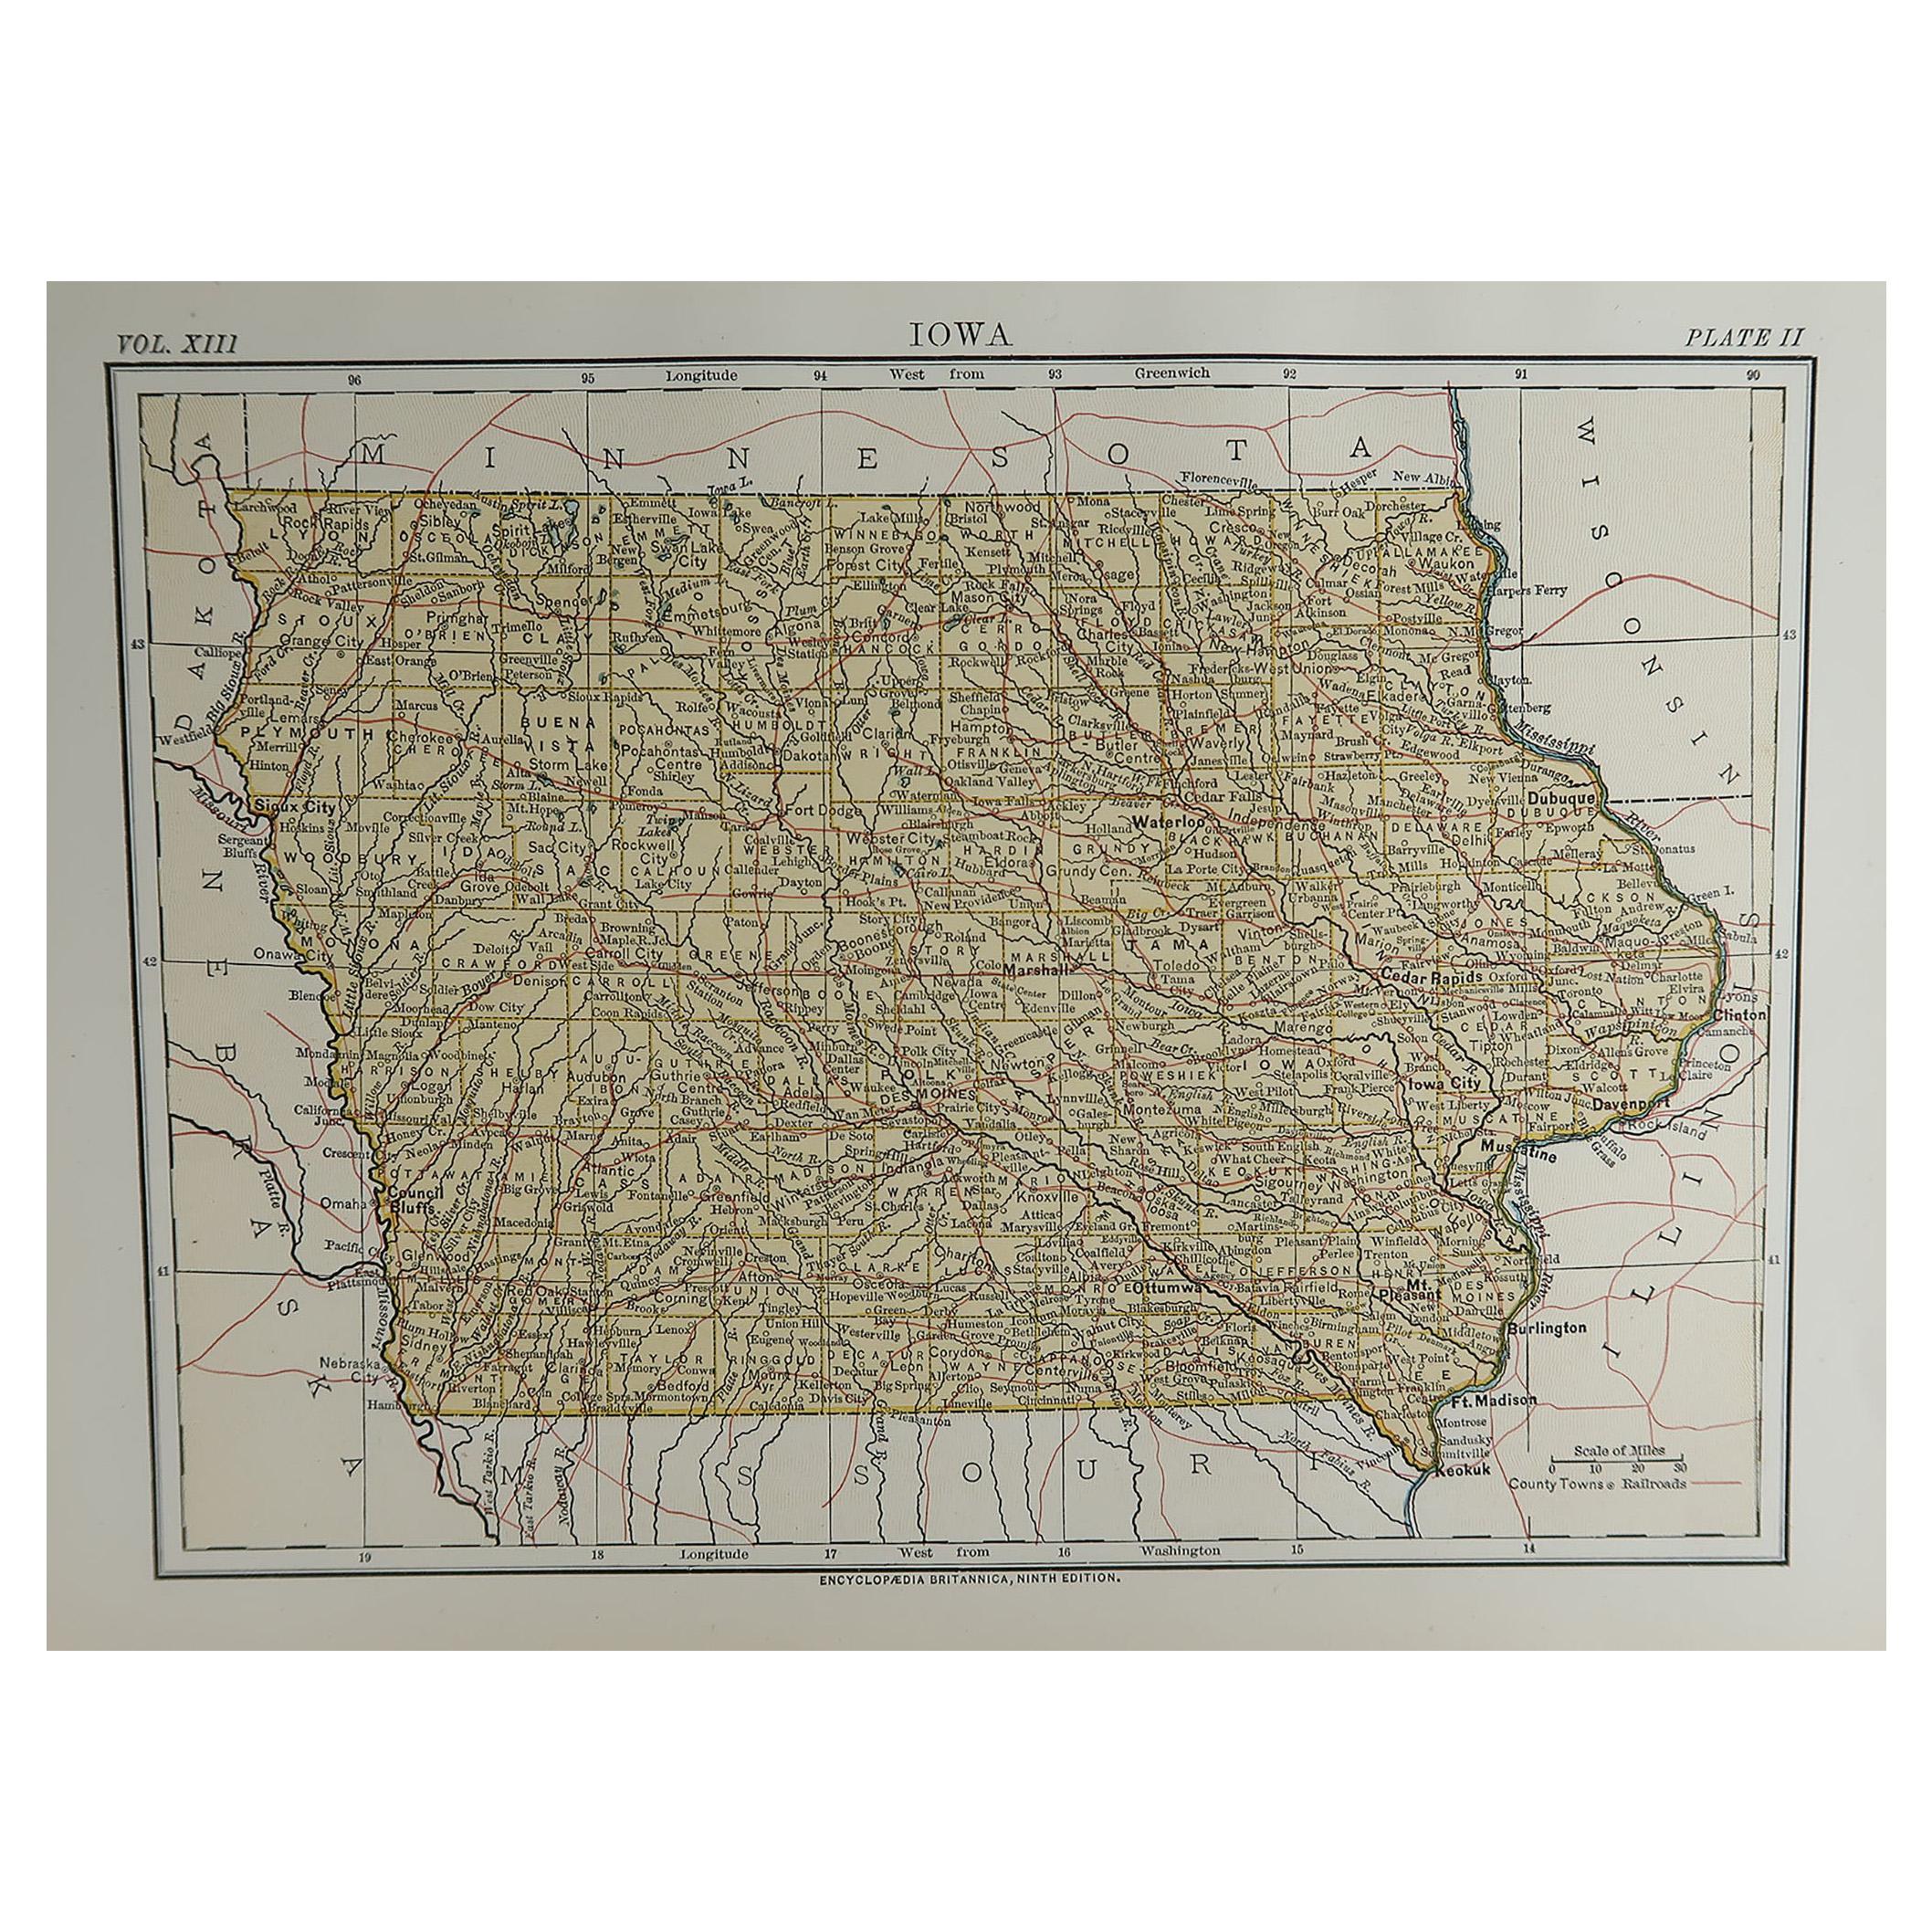 Original Antique Map of The American State of Iowa, 1889